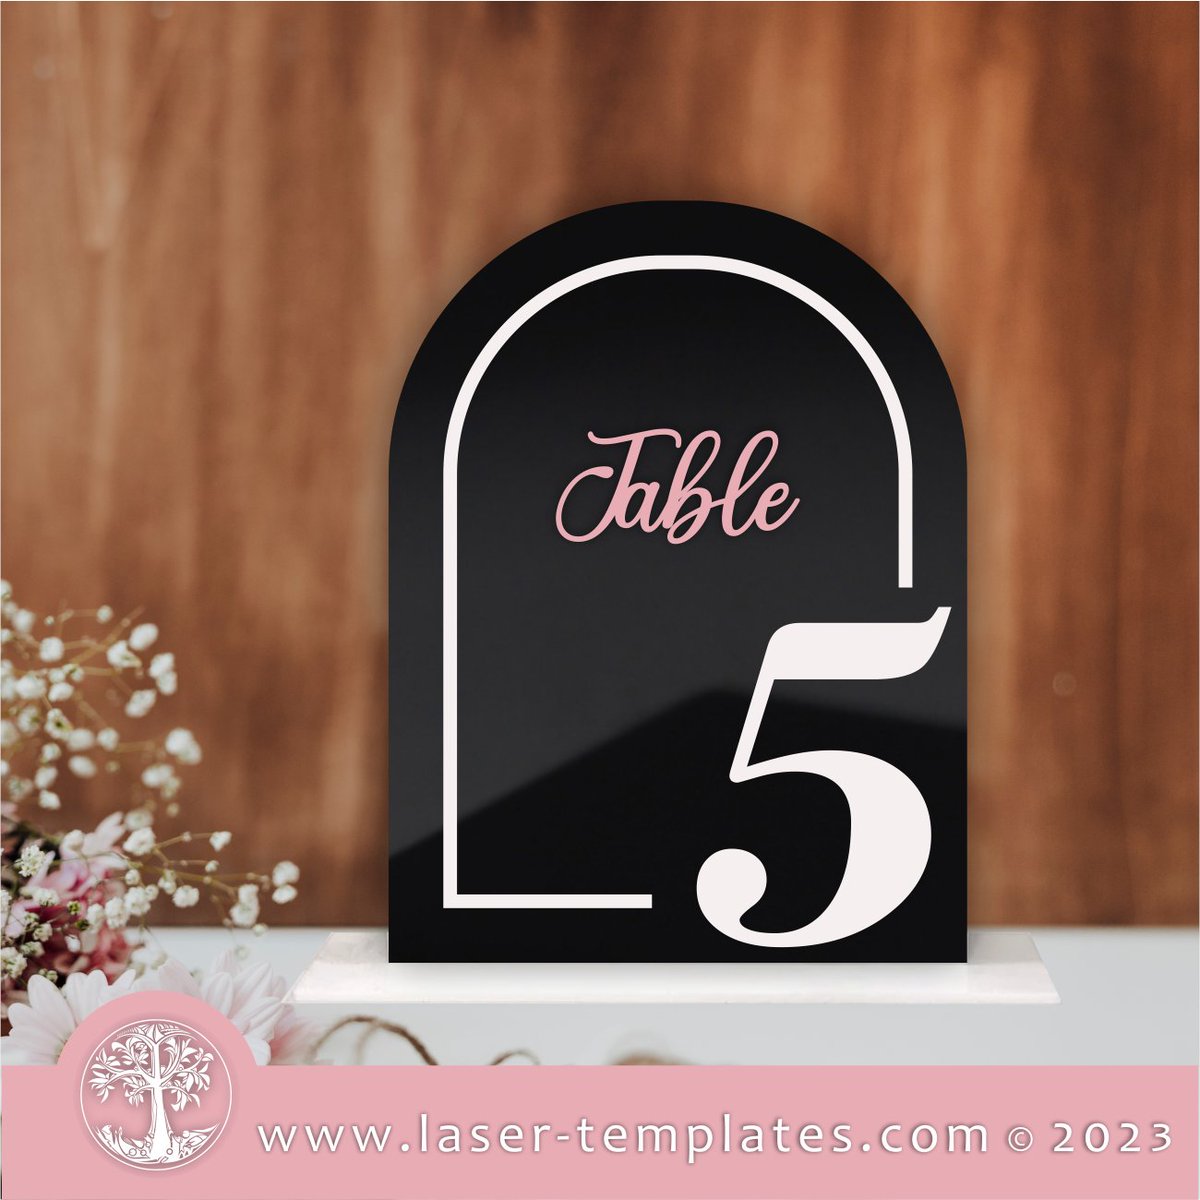 Have a look at our wide range of laser cut ready table number designs - perfect for  your wedding or event catalogue laser-templates.com/search?type=pr… #tablenumber #weddingtablenumbers #vector #lasercuttingandengraving